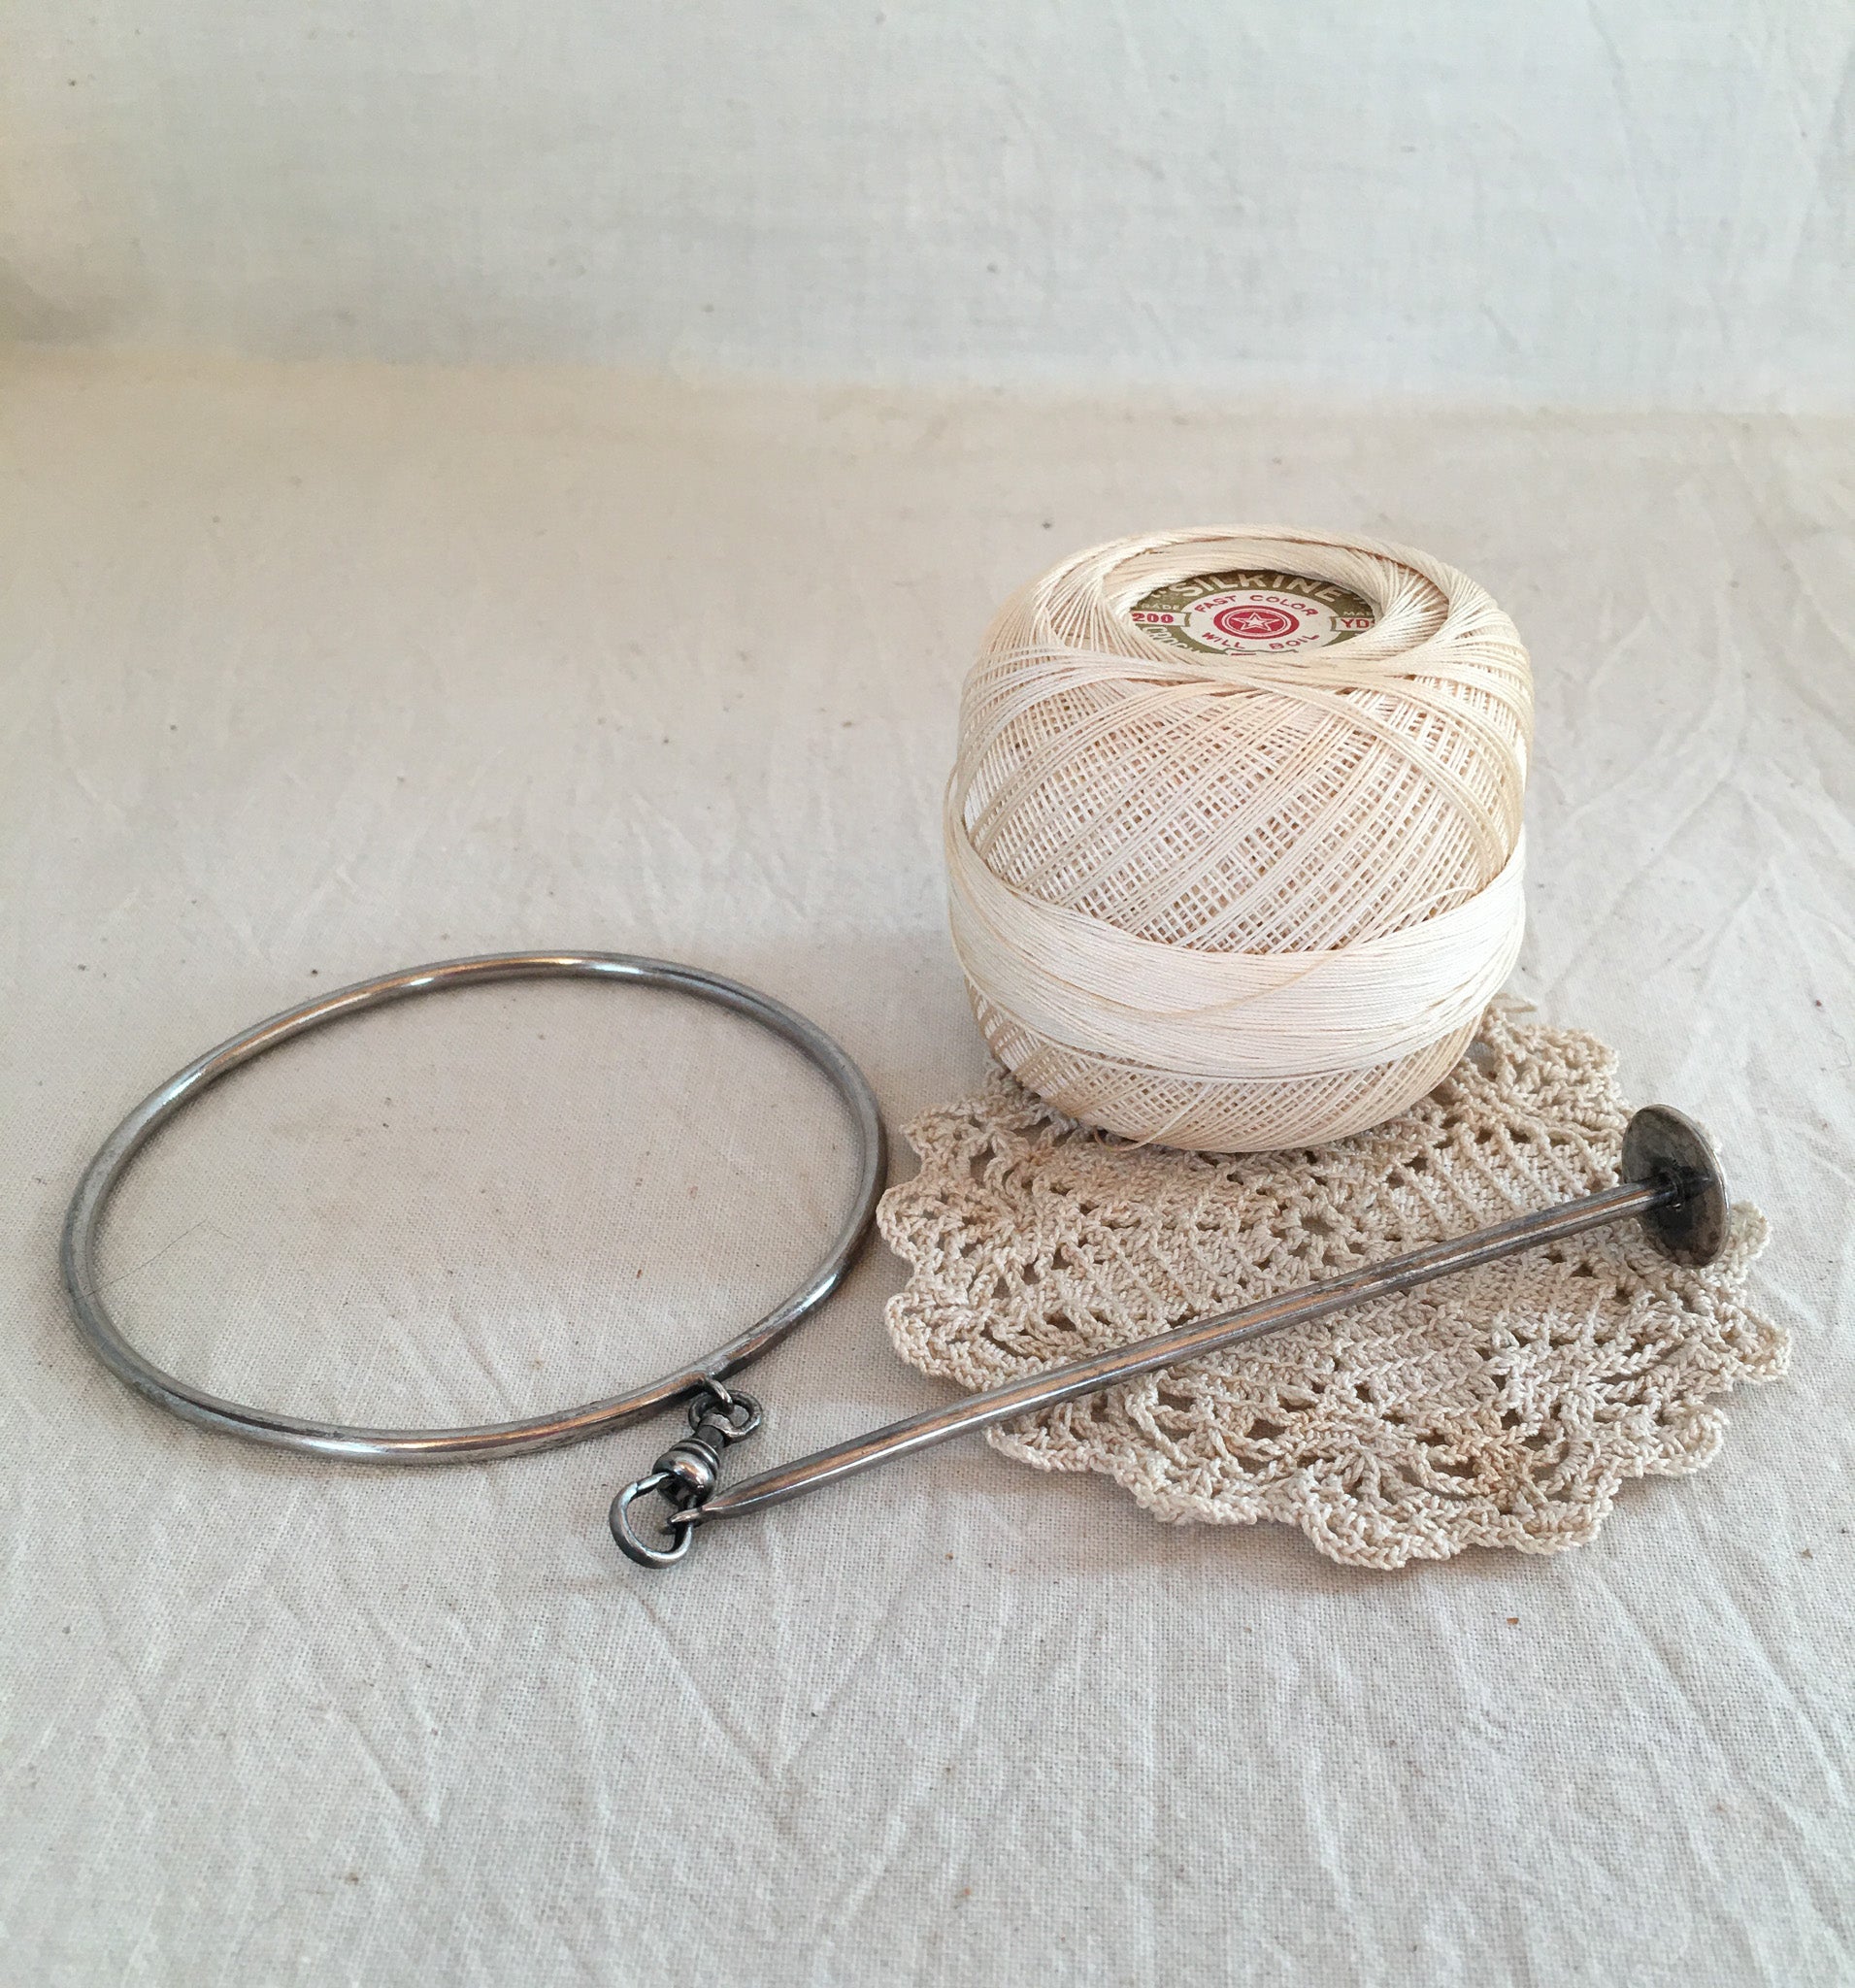 Sterling Silver Wrist/Bracelet Style Yarn Ball Holder, with Guilloche Decoration